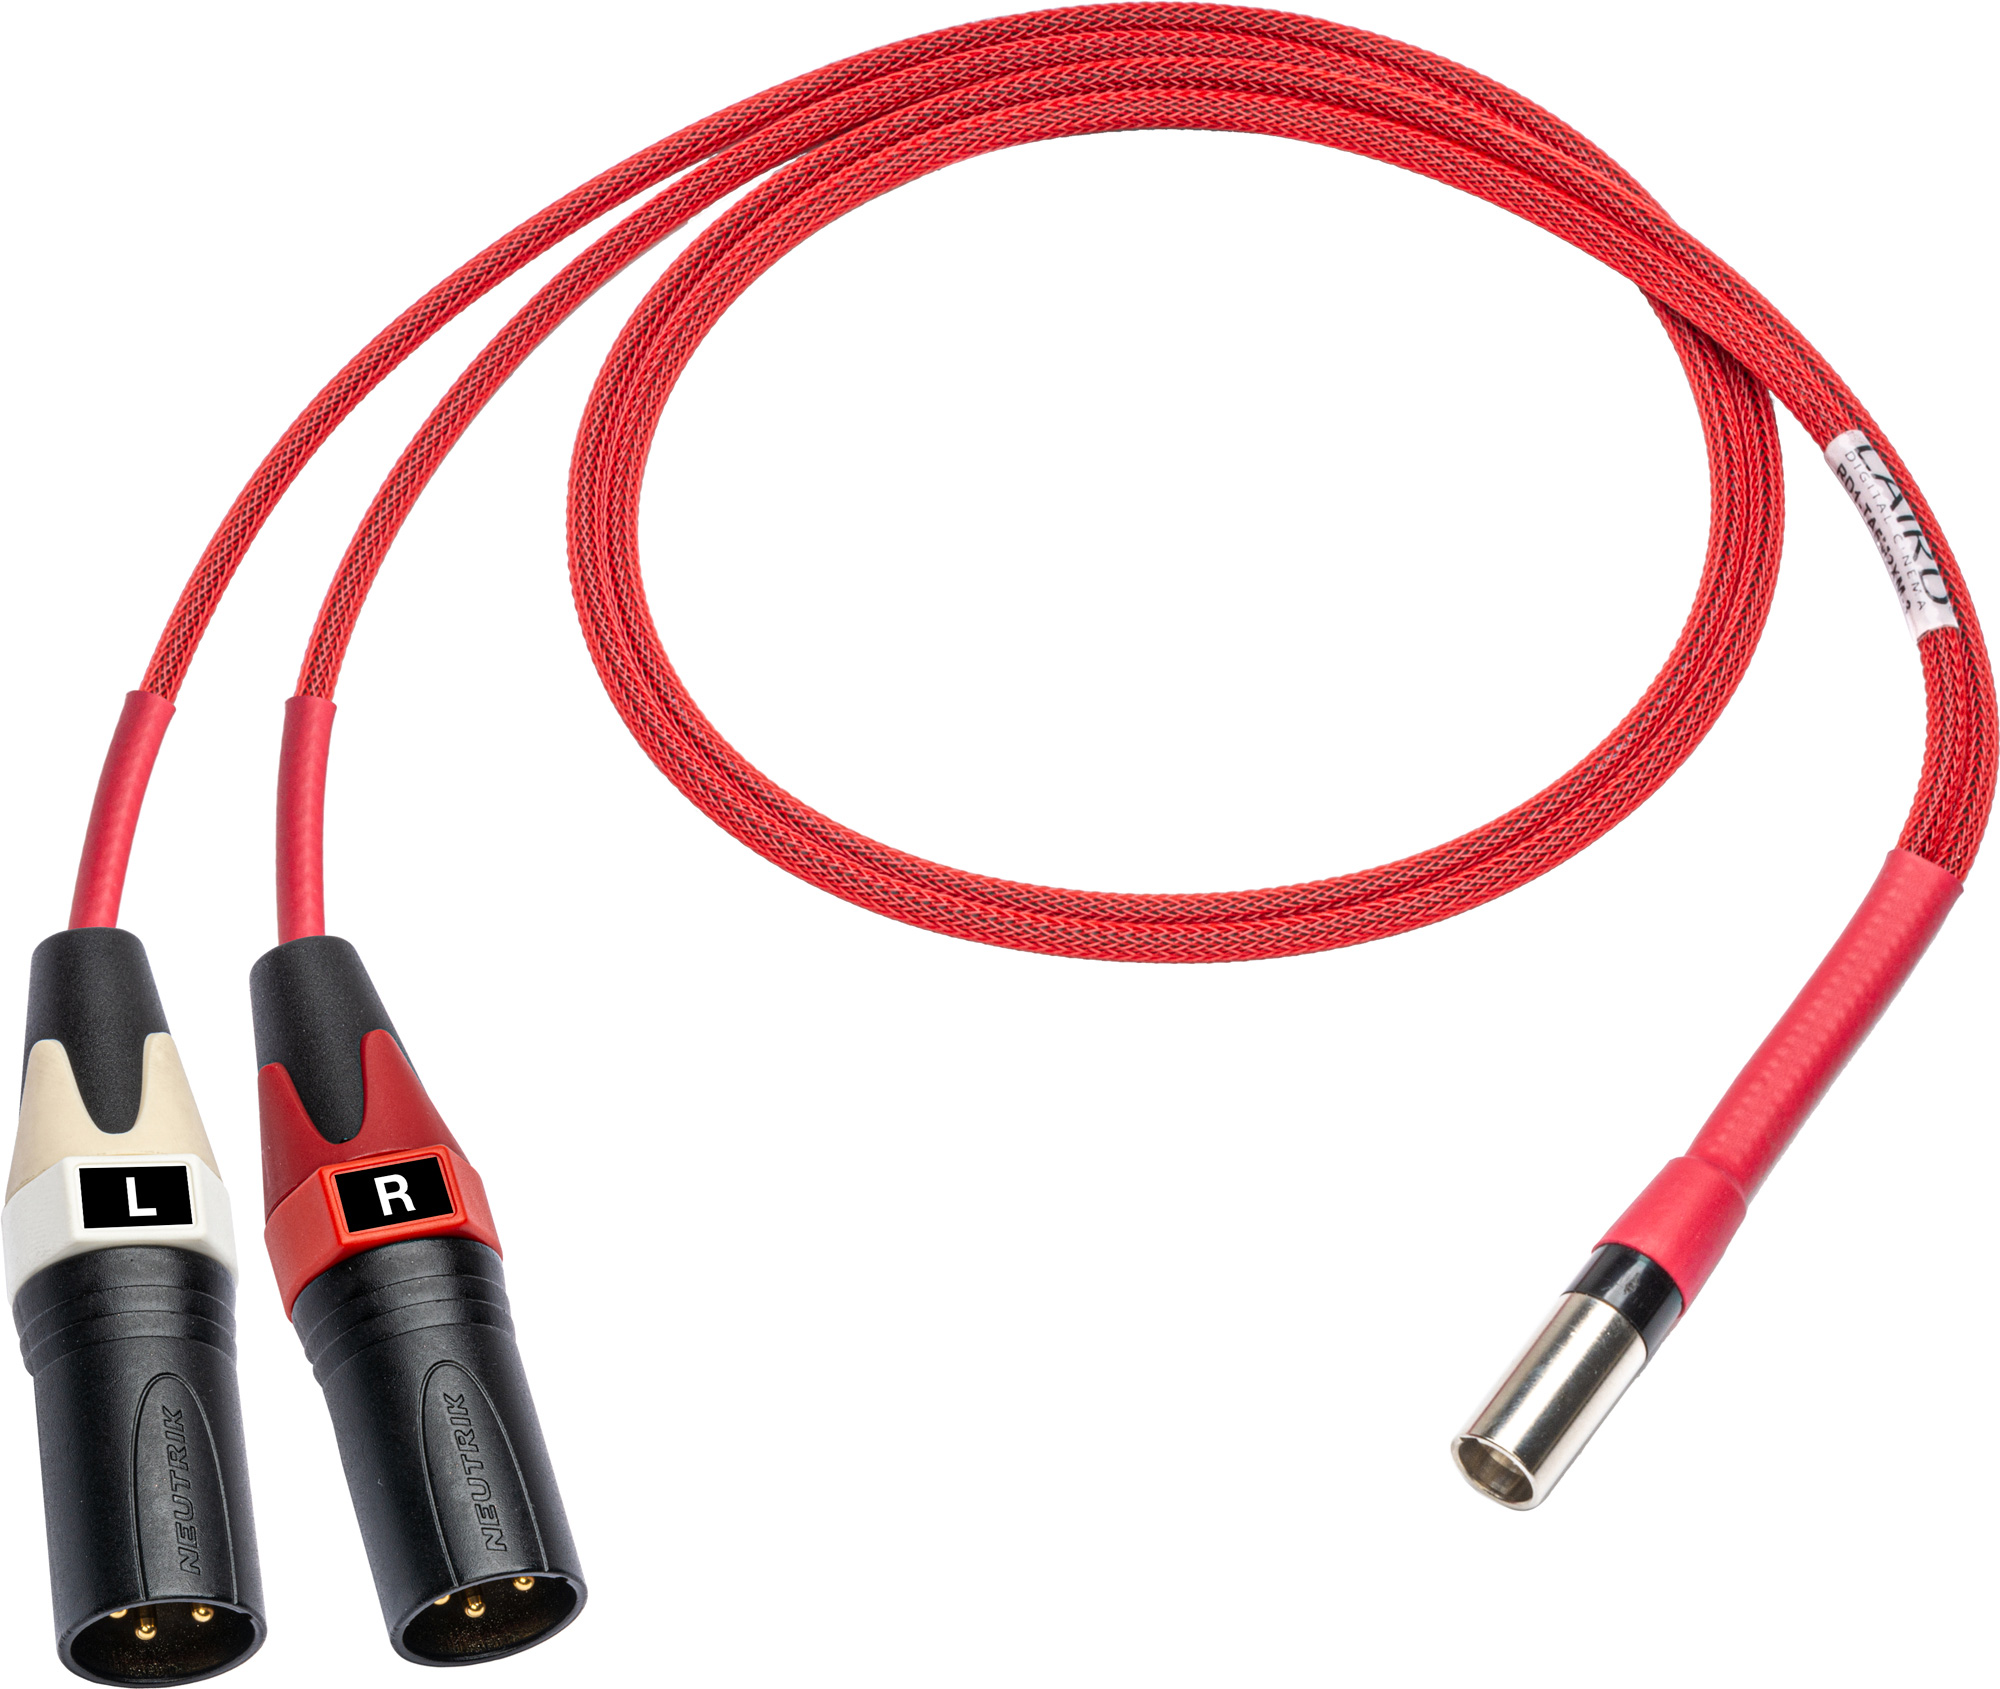 Laird RD1-TA5M2XM-18IN Line Audio Out Breakout for Red One Camera 5-Pin Mini XLR Male to Dual 3-Pin XLR Male - 18 Inch